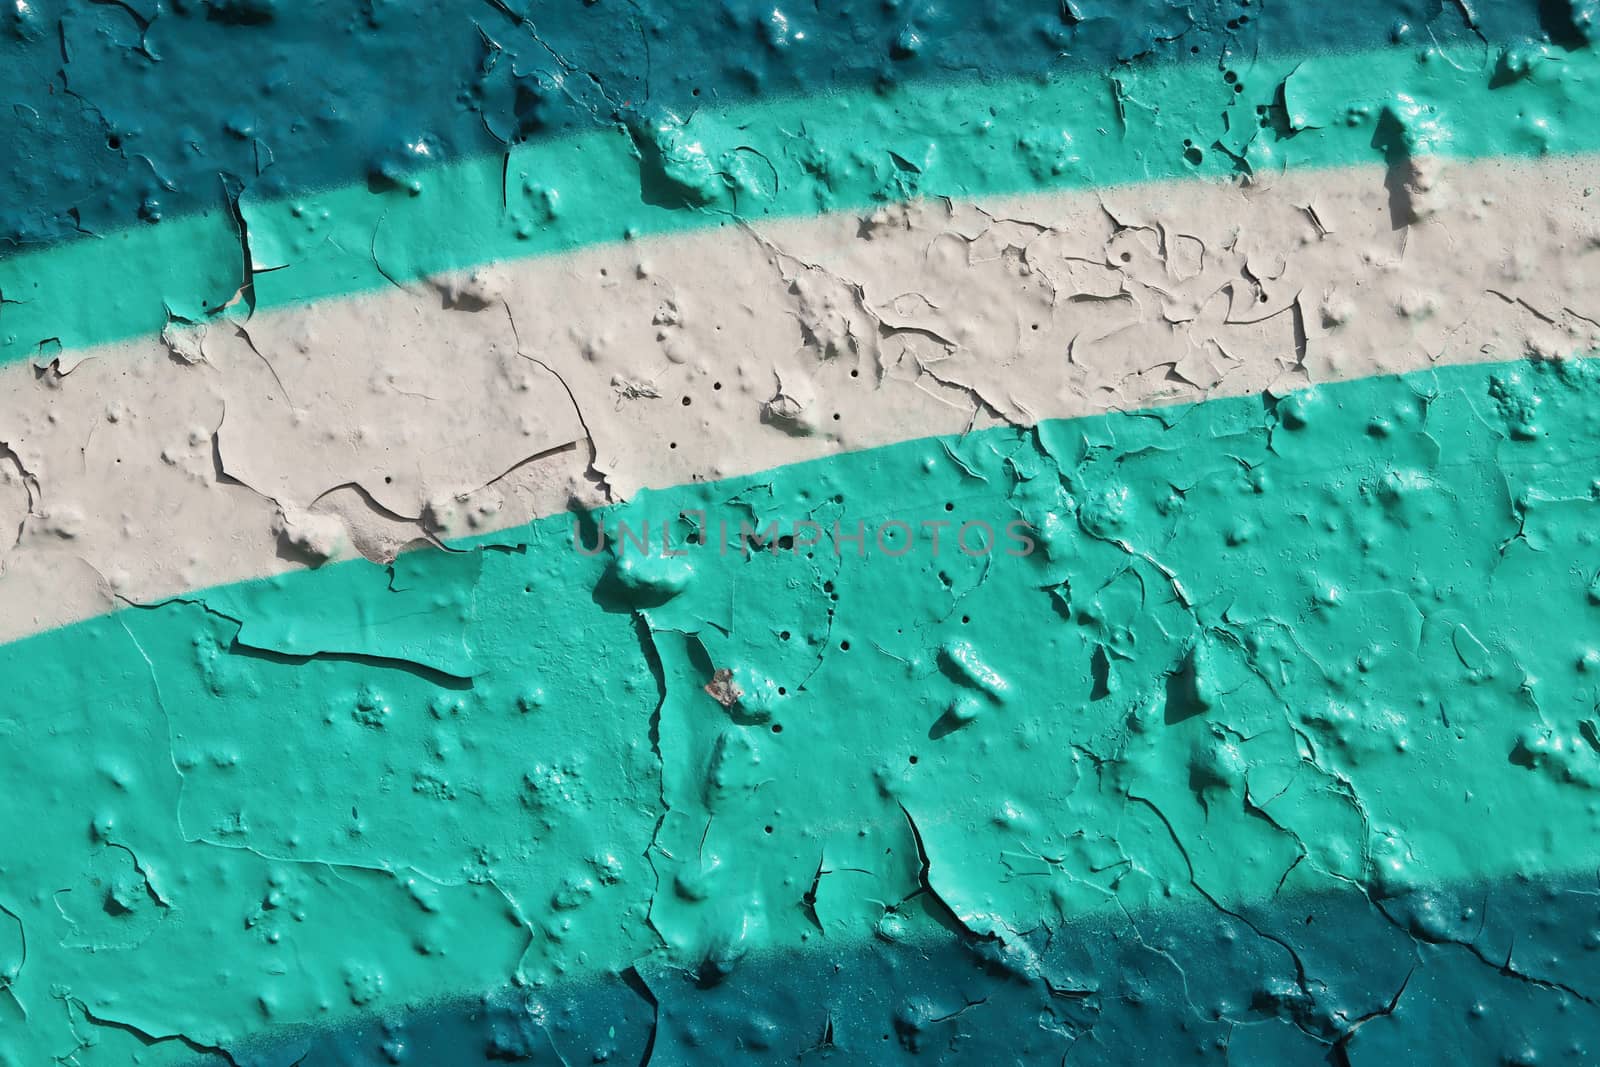 Turquoise Old Weathered Graffiti Wall. Colorful Concrete Wall Fragment.